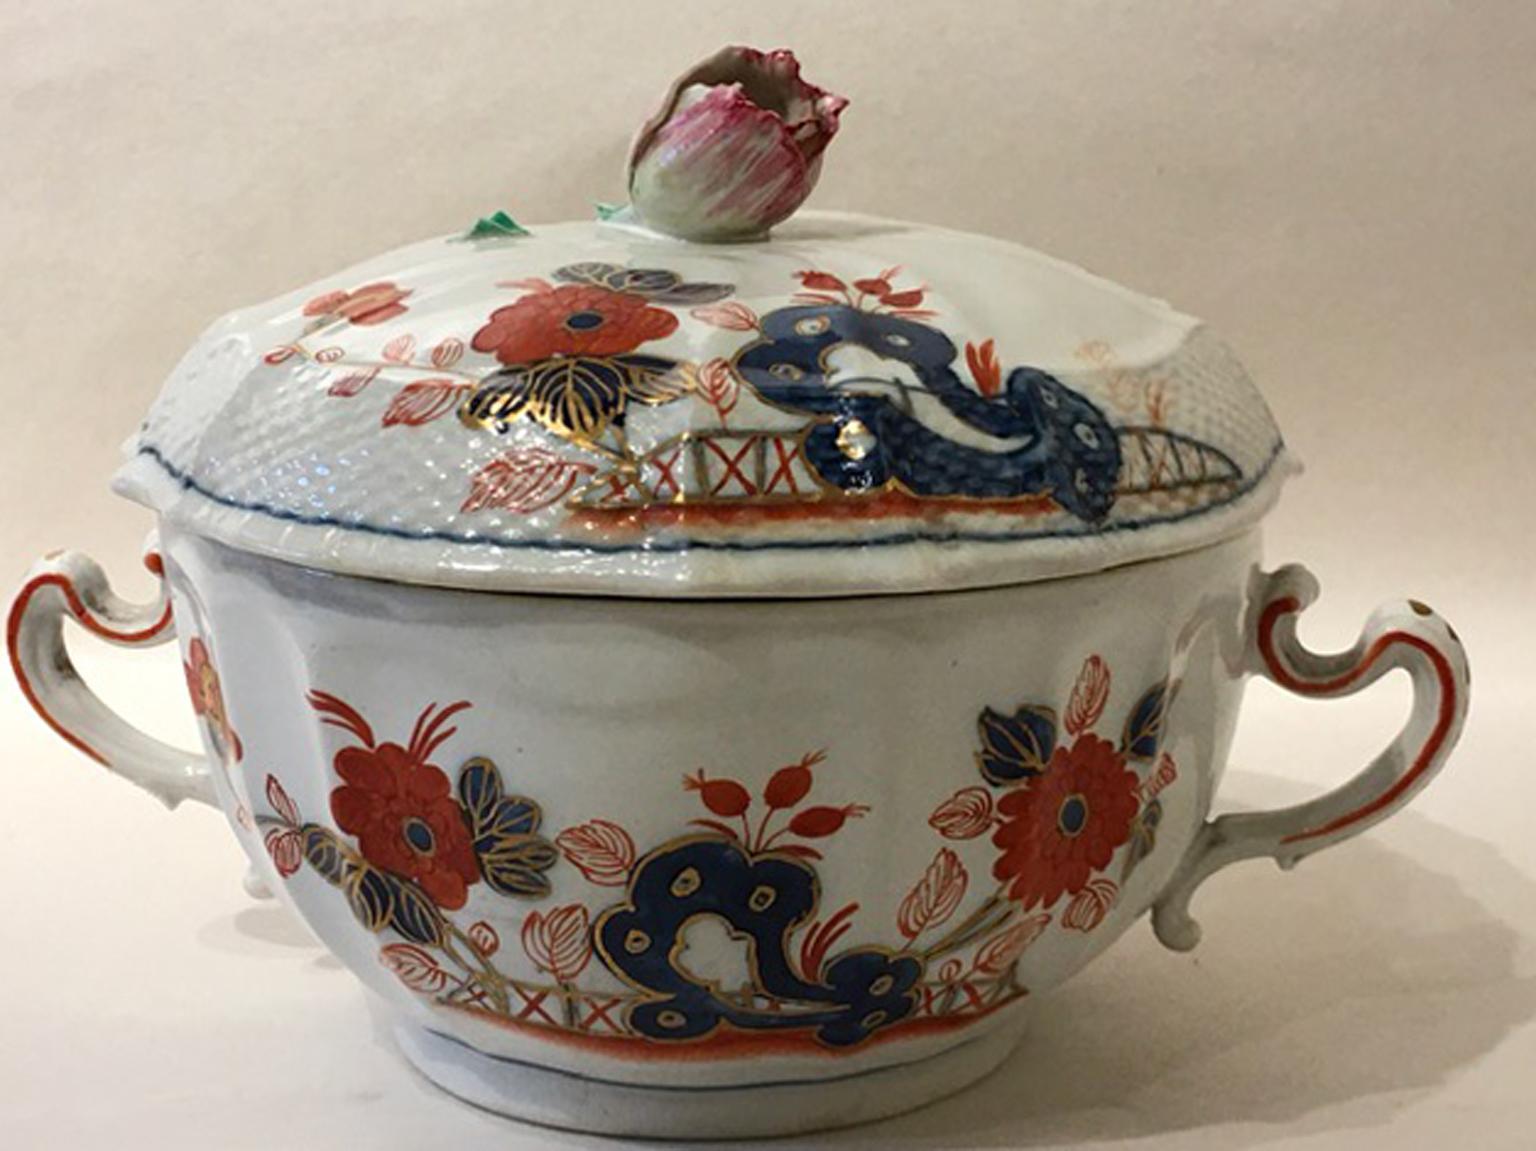 Italy Richard Ginori 19th Century Porcelain Covered Cup Red Blue Decor For Sale 1